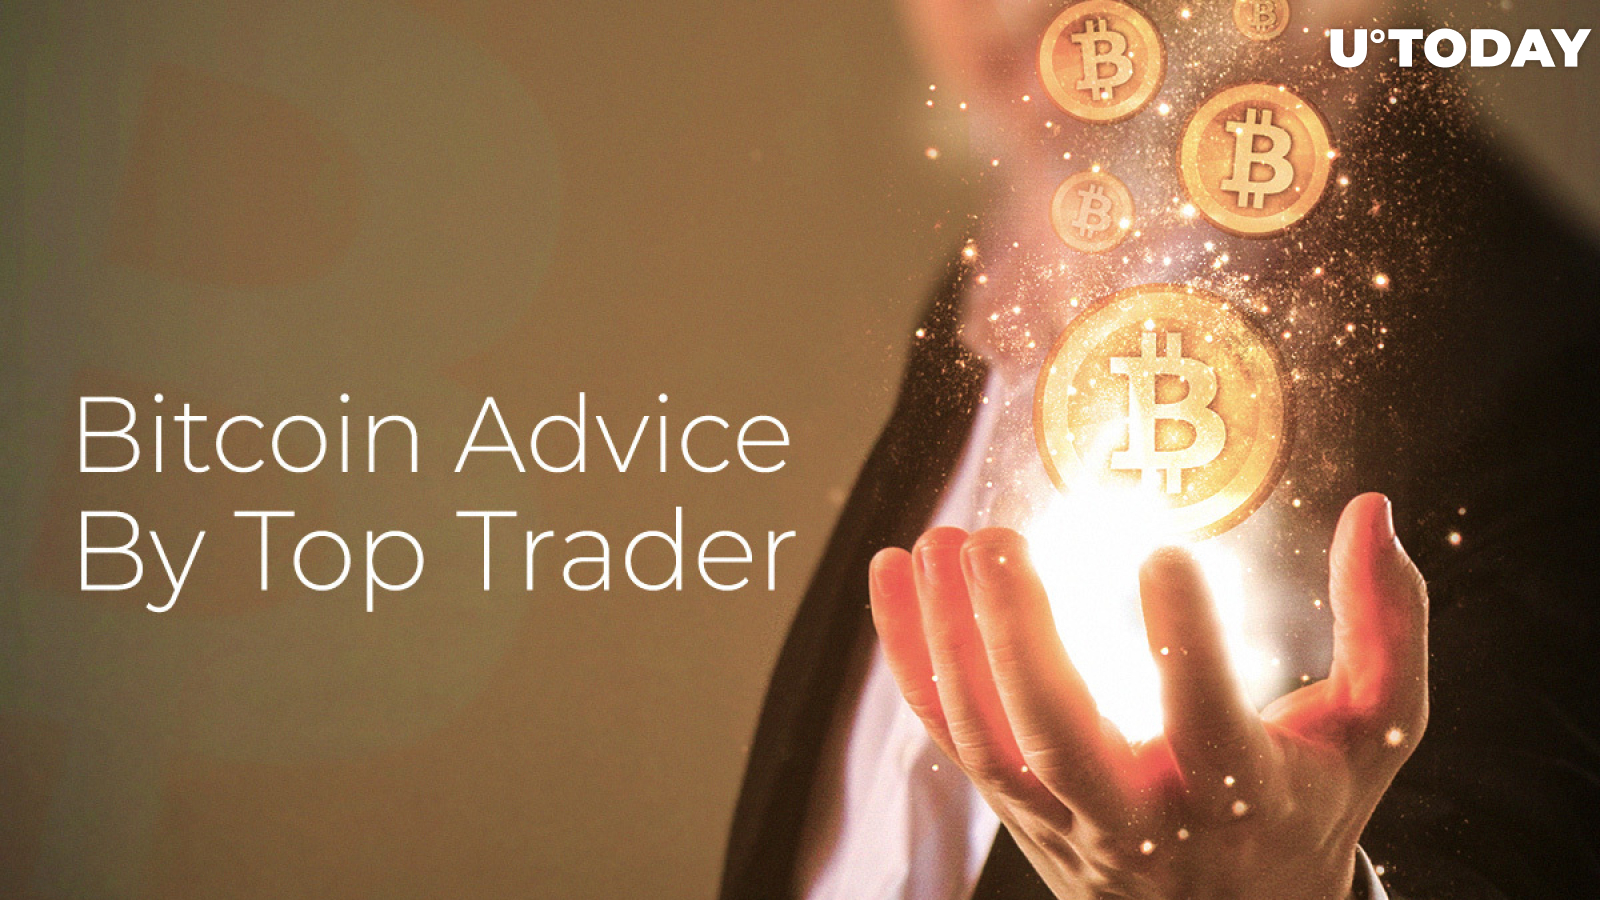 Bitcoin (BTC) Advice From Top Trader: Lower Your Expectations, No Peak in 2021